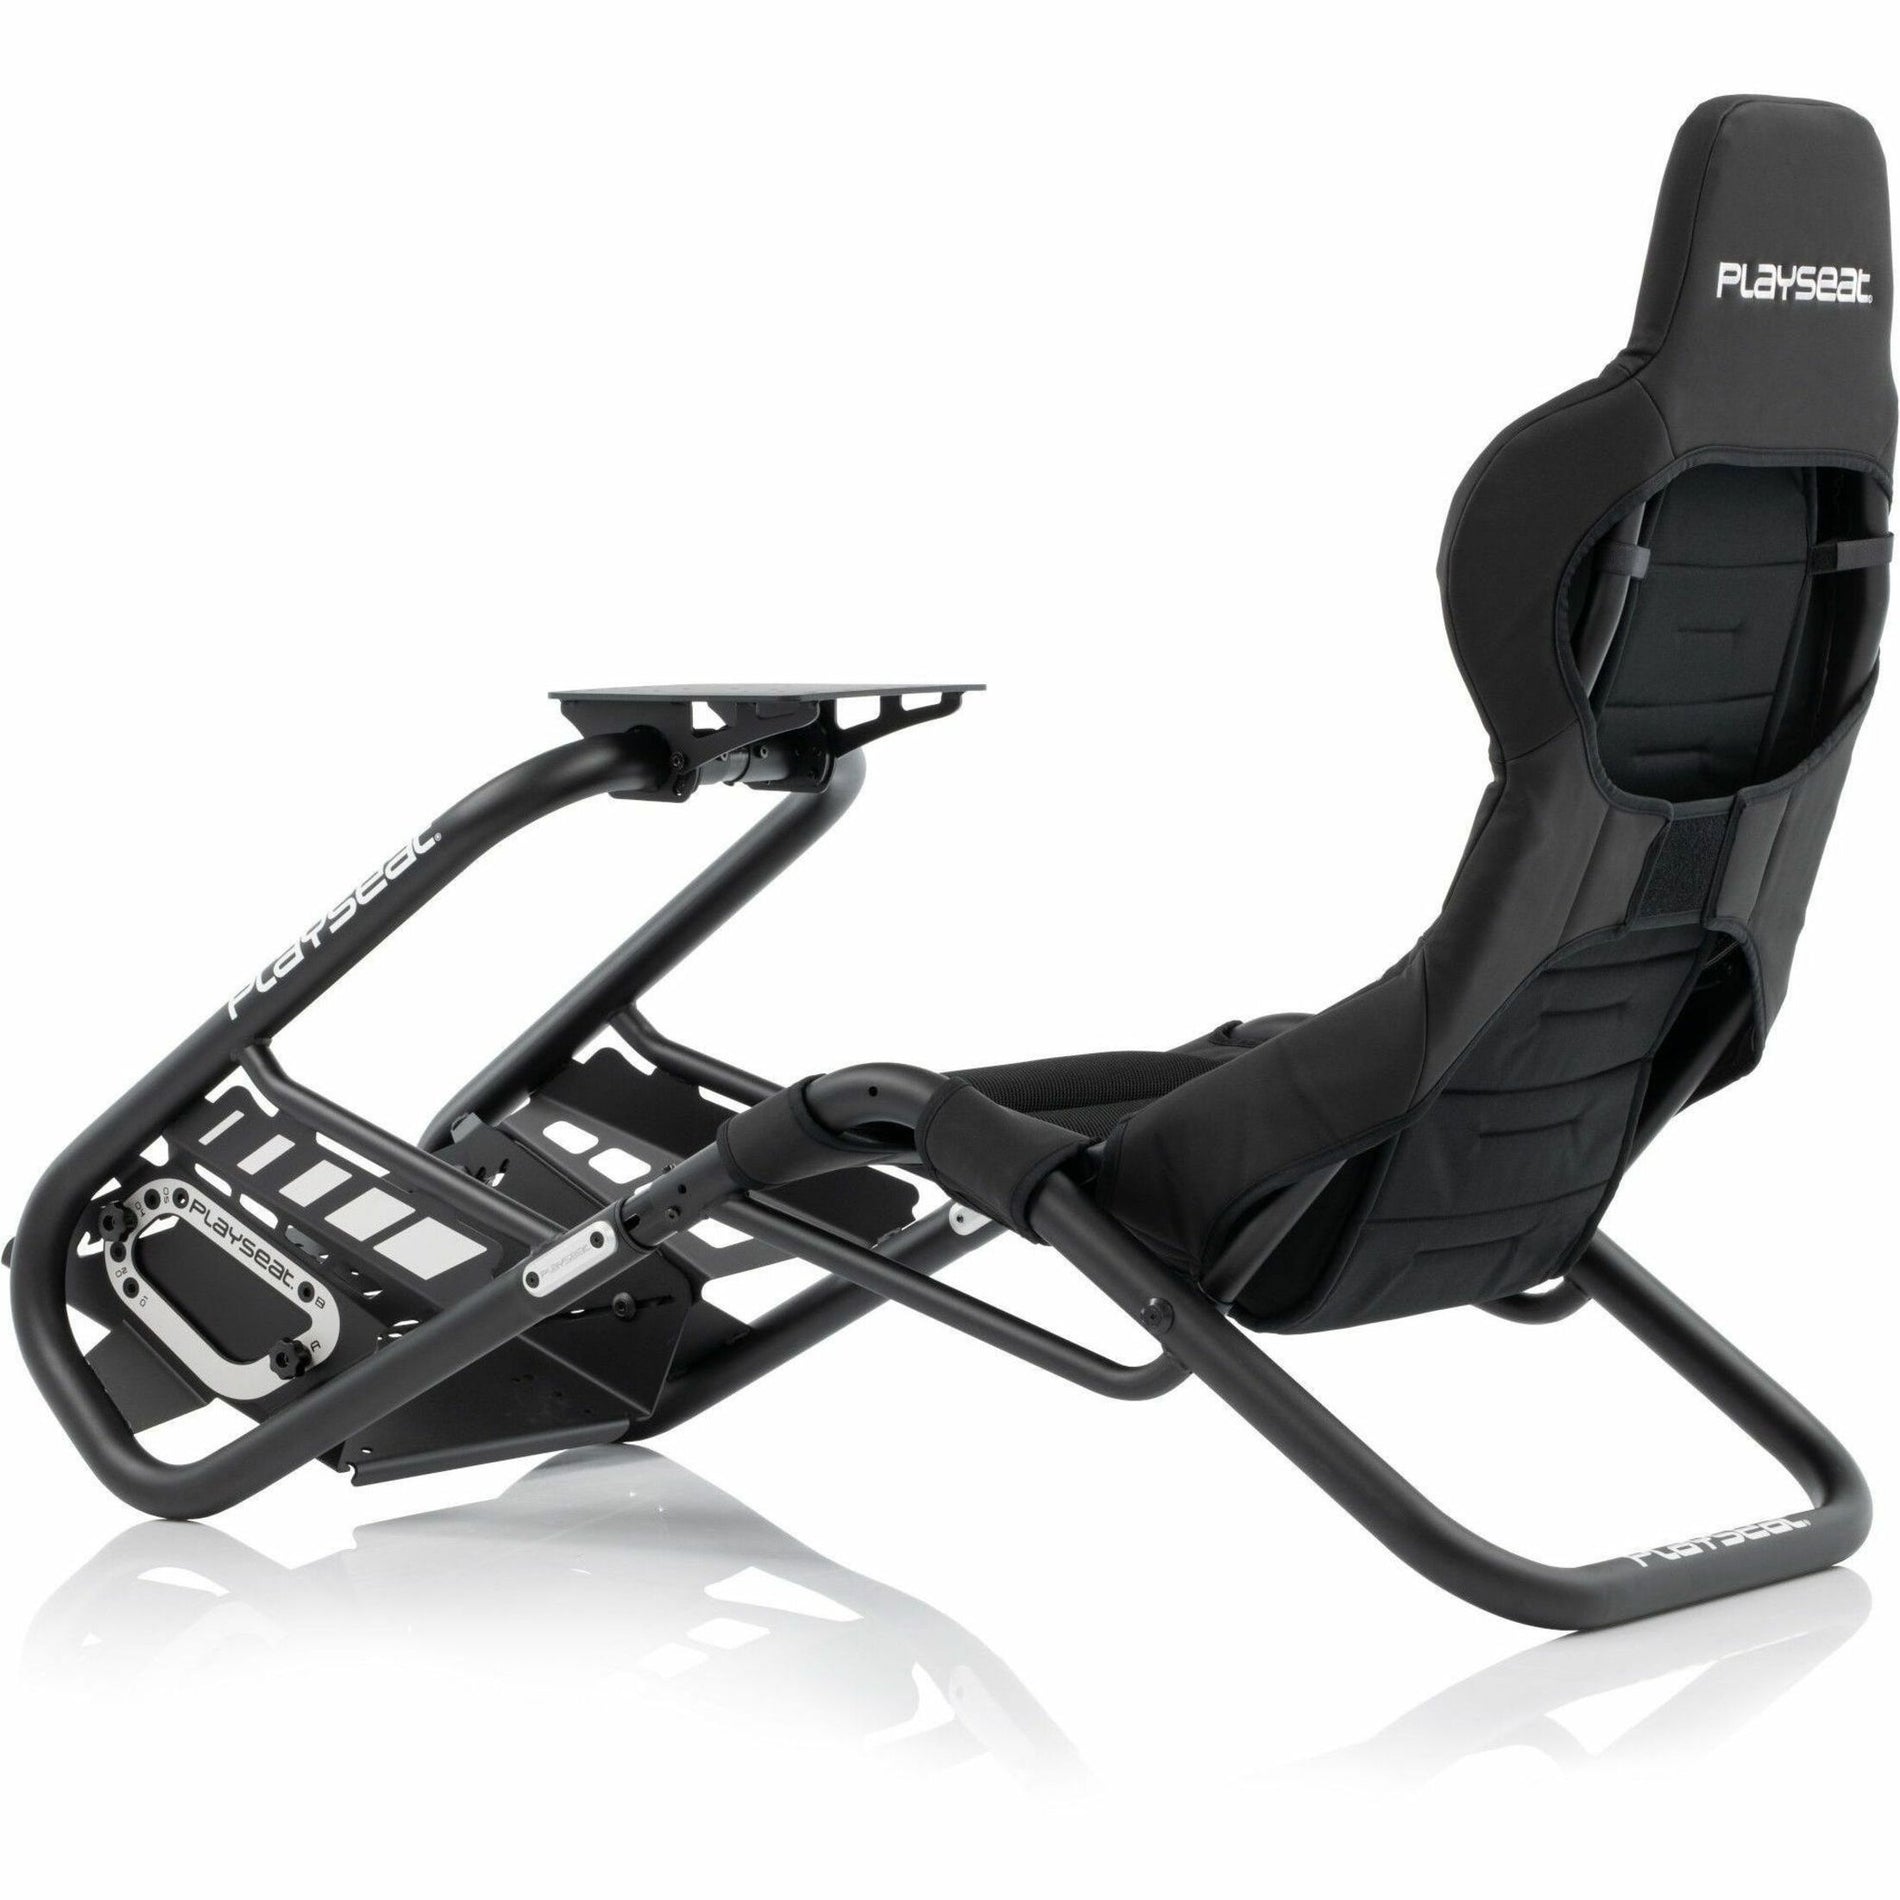 Playseats Trophy Black, Gaming Chair with Adjustable Seat Height